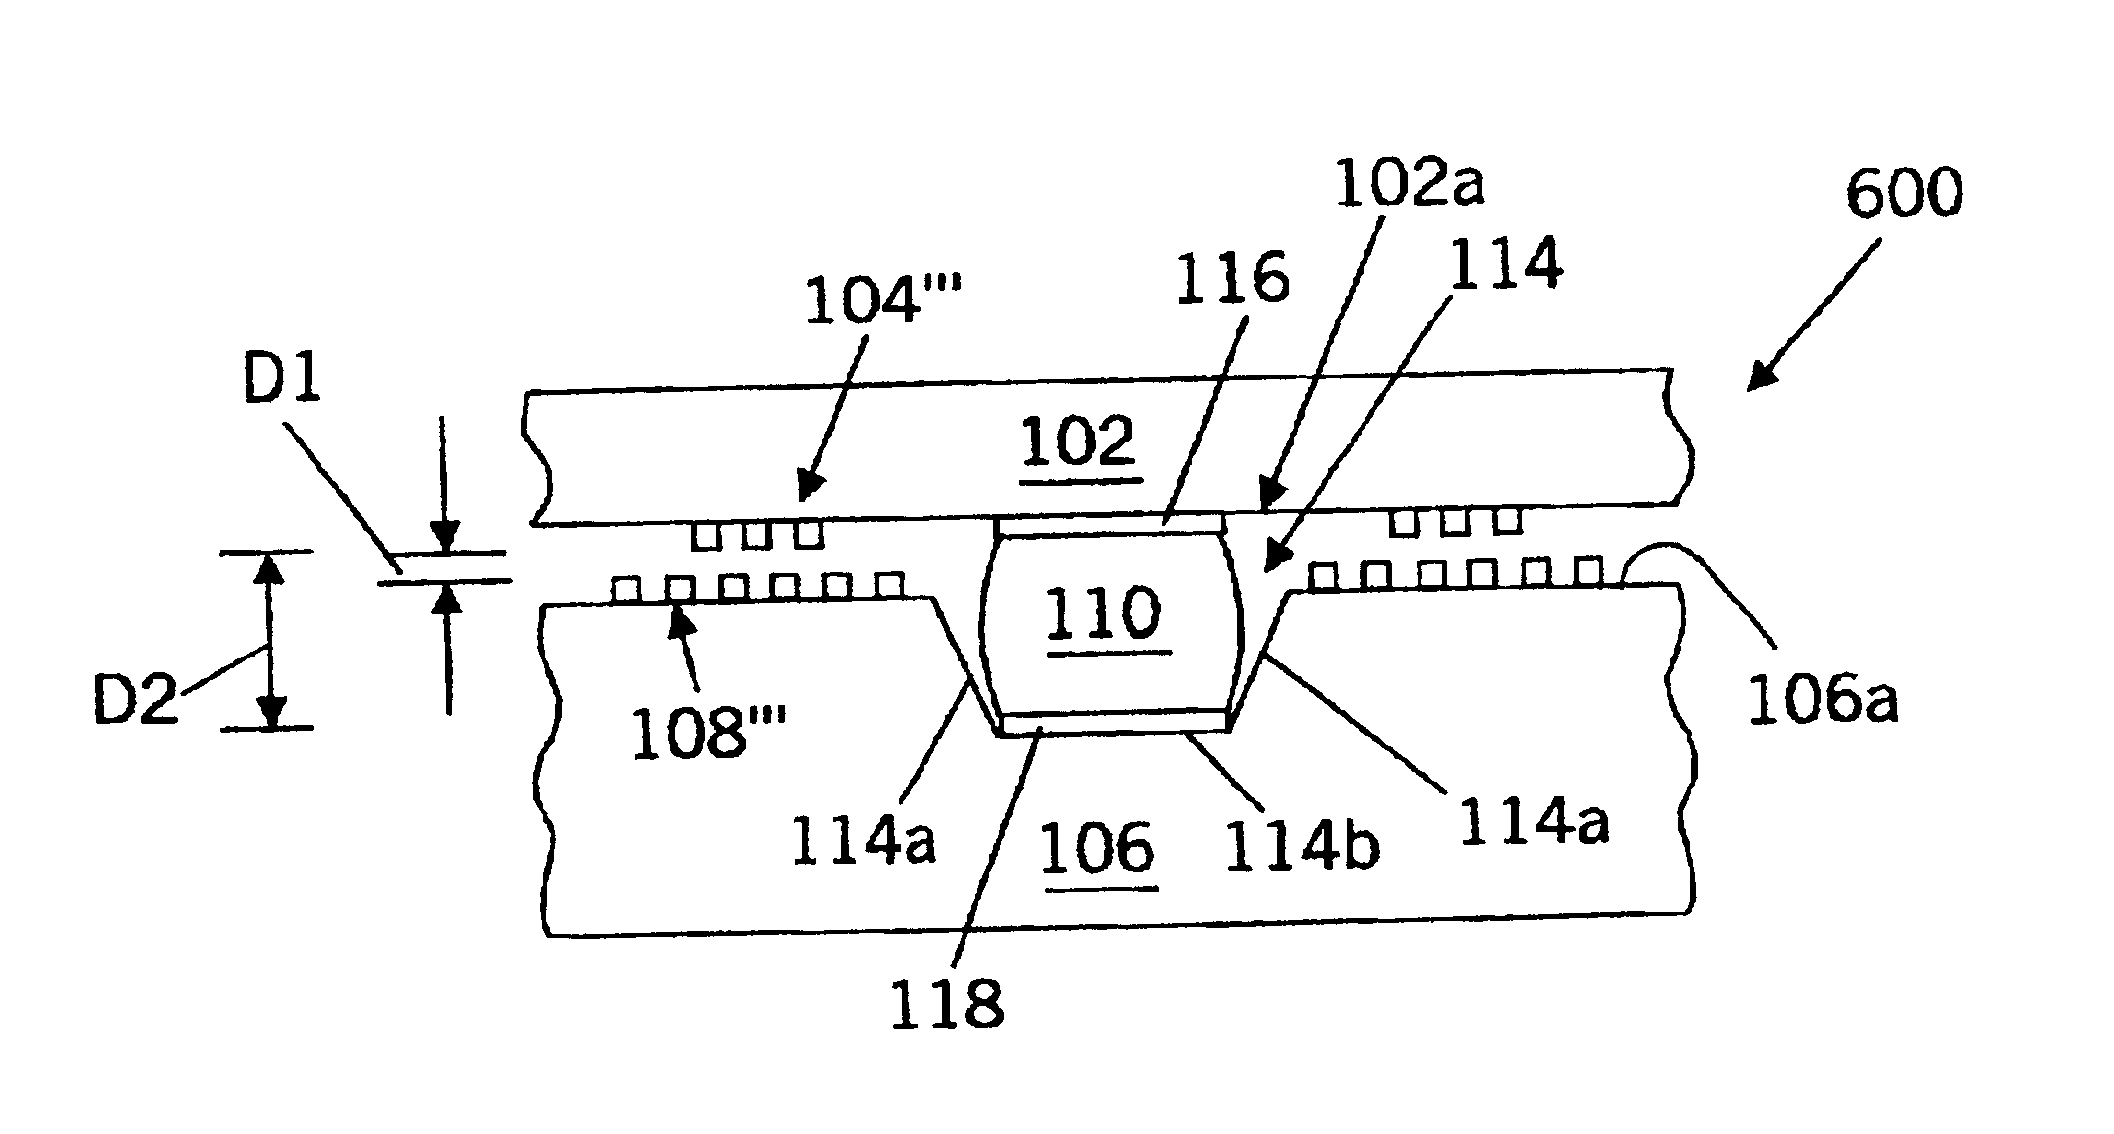 Inductively coupled electrical connectors